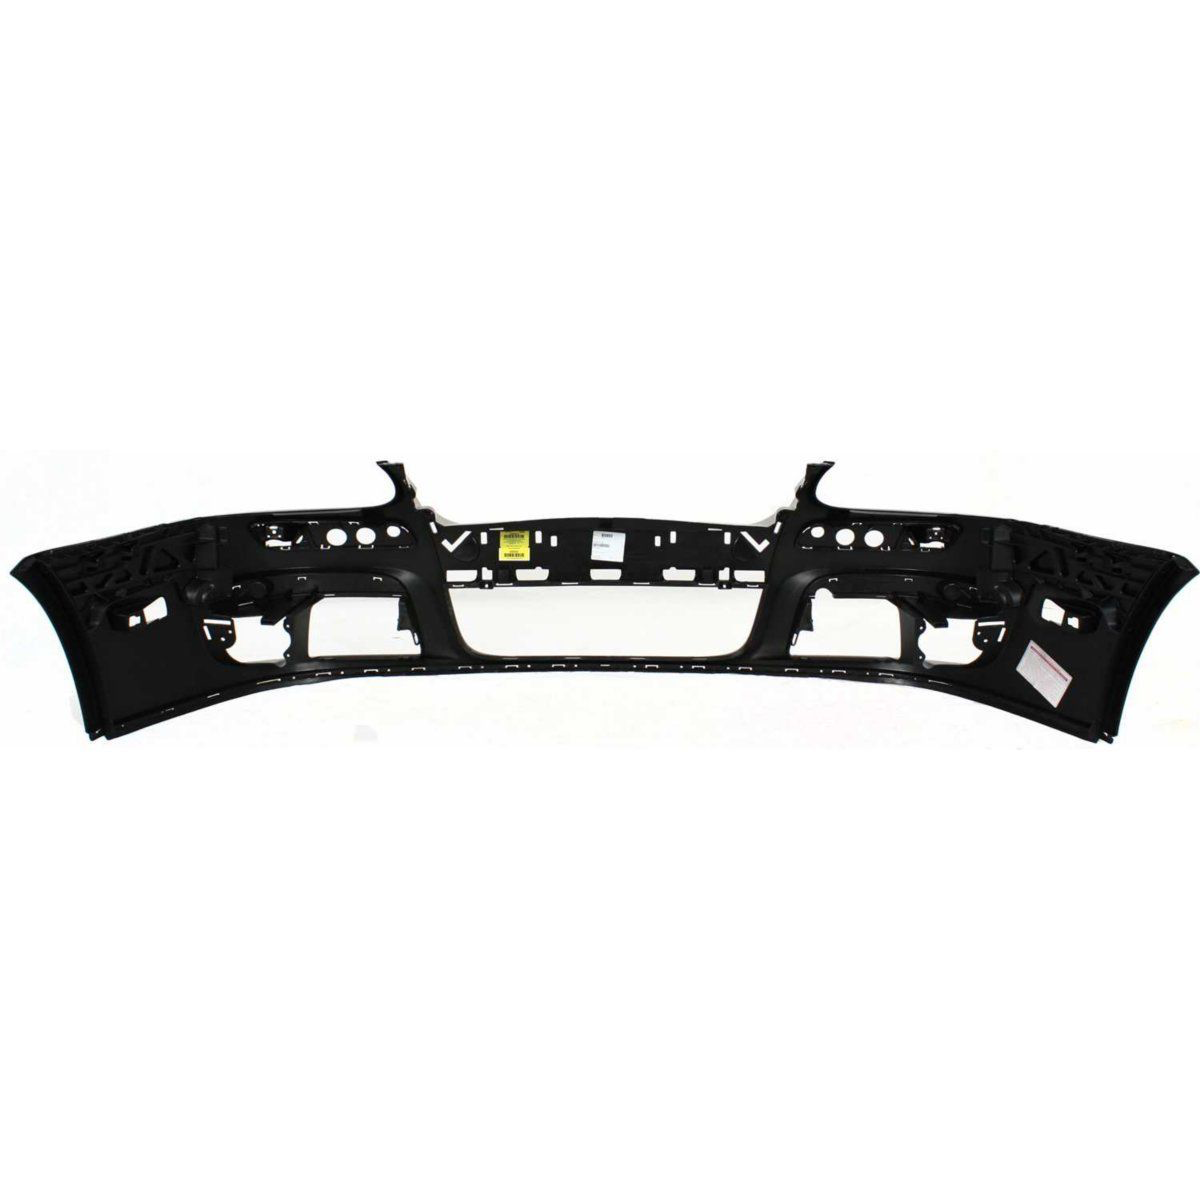 2005-2010 VOLKSWAGEN JETTA Front Bumper Cover Type 5  Sedan Painted to Match